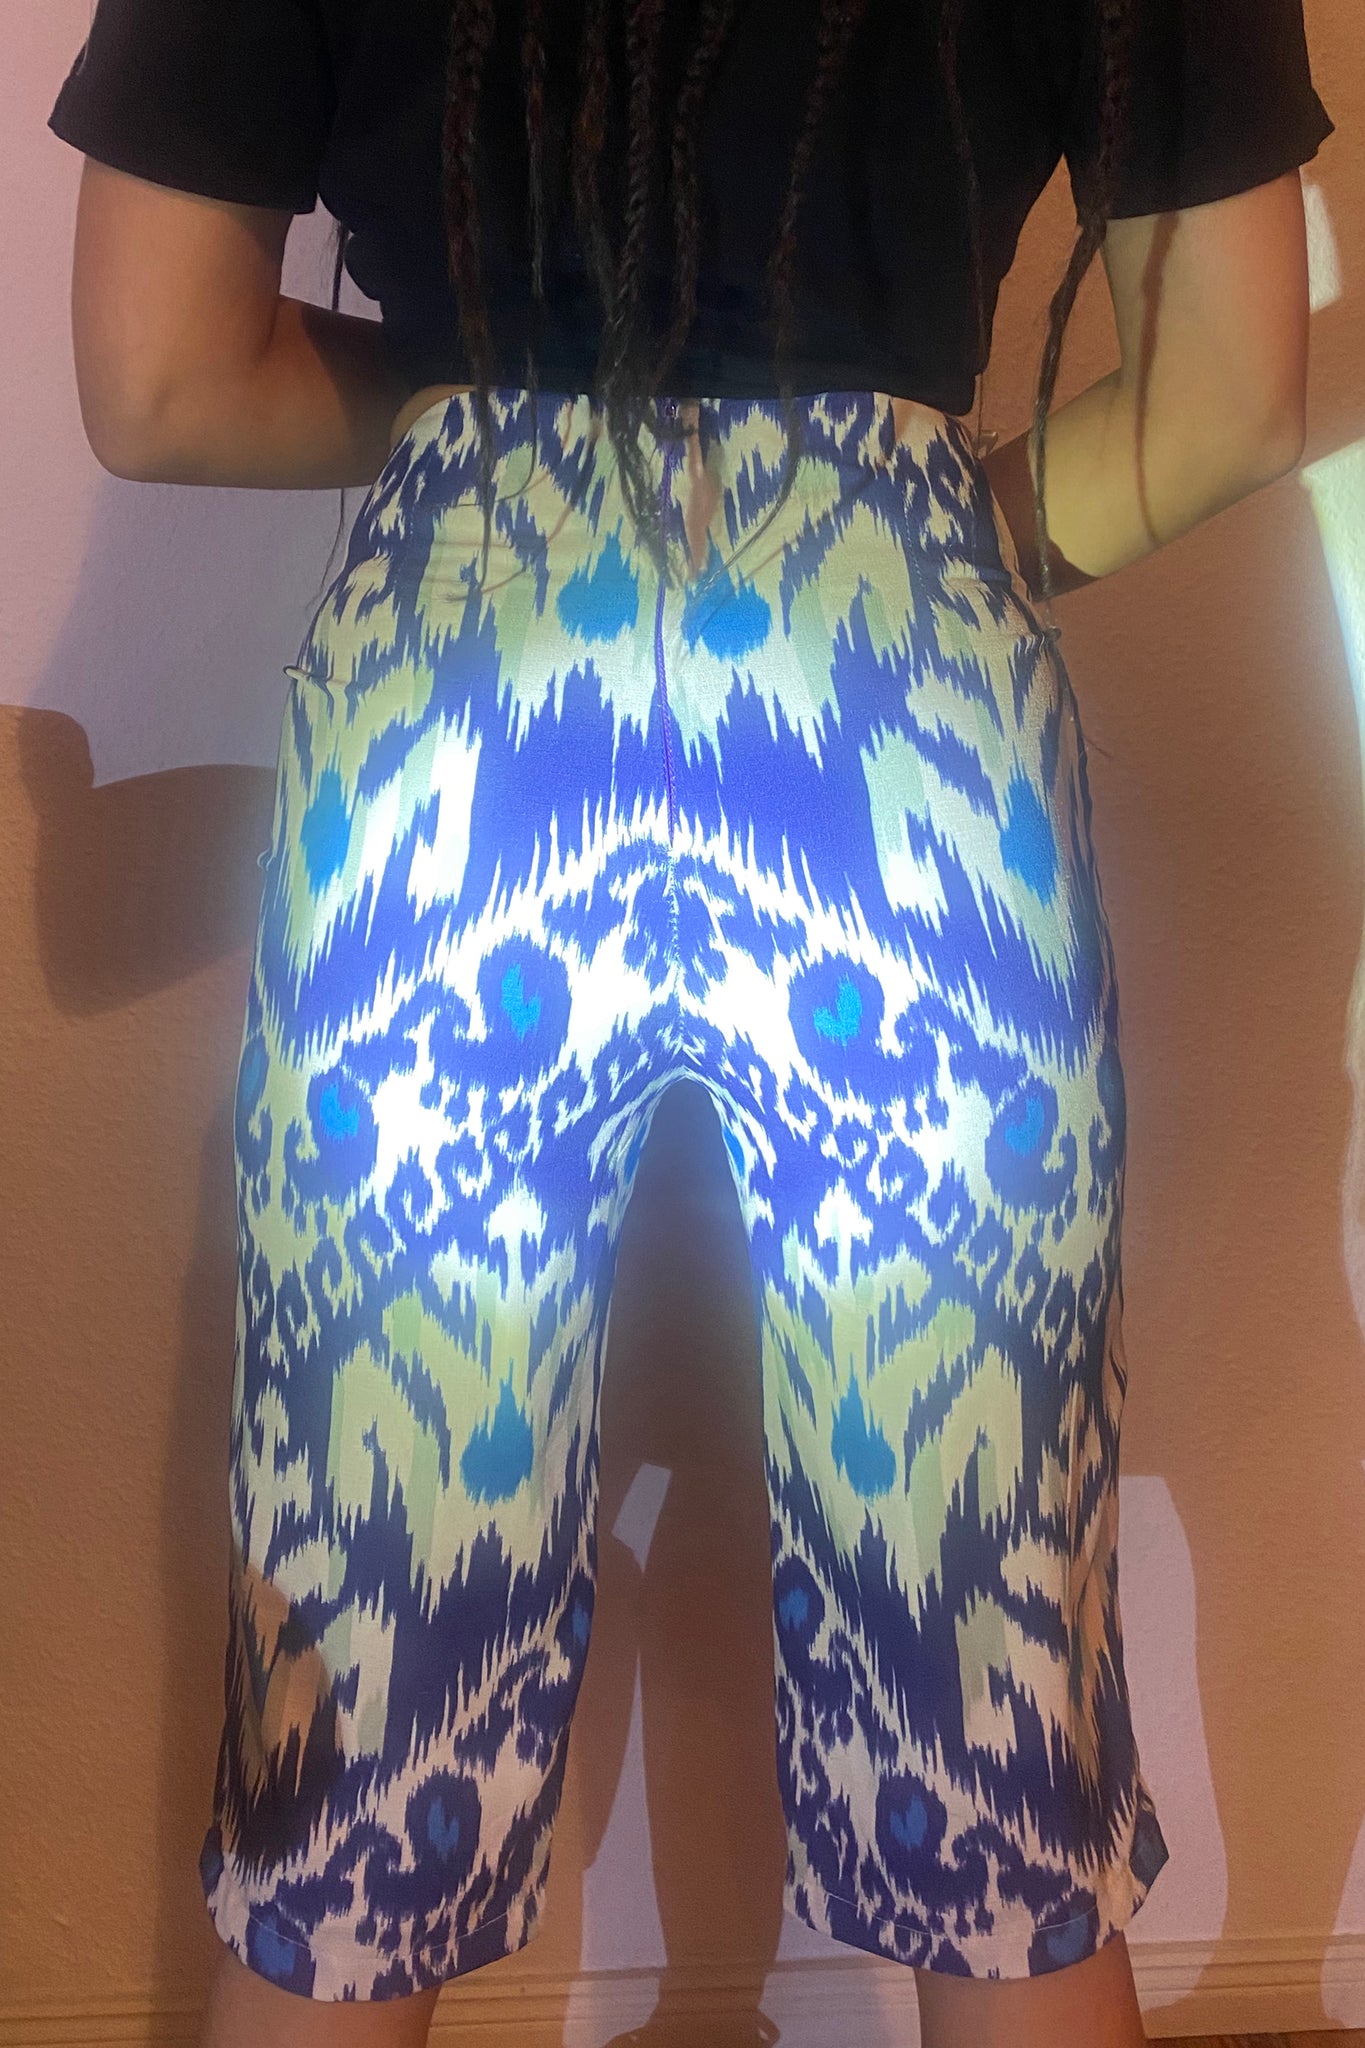 A light shines on the back of adras/ikat capri pants on a body, showing the details of the blues and white fabric.